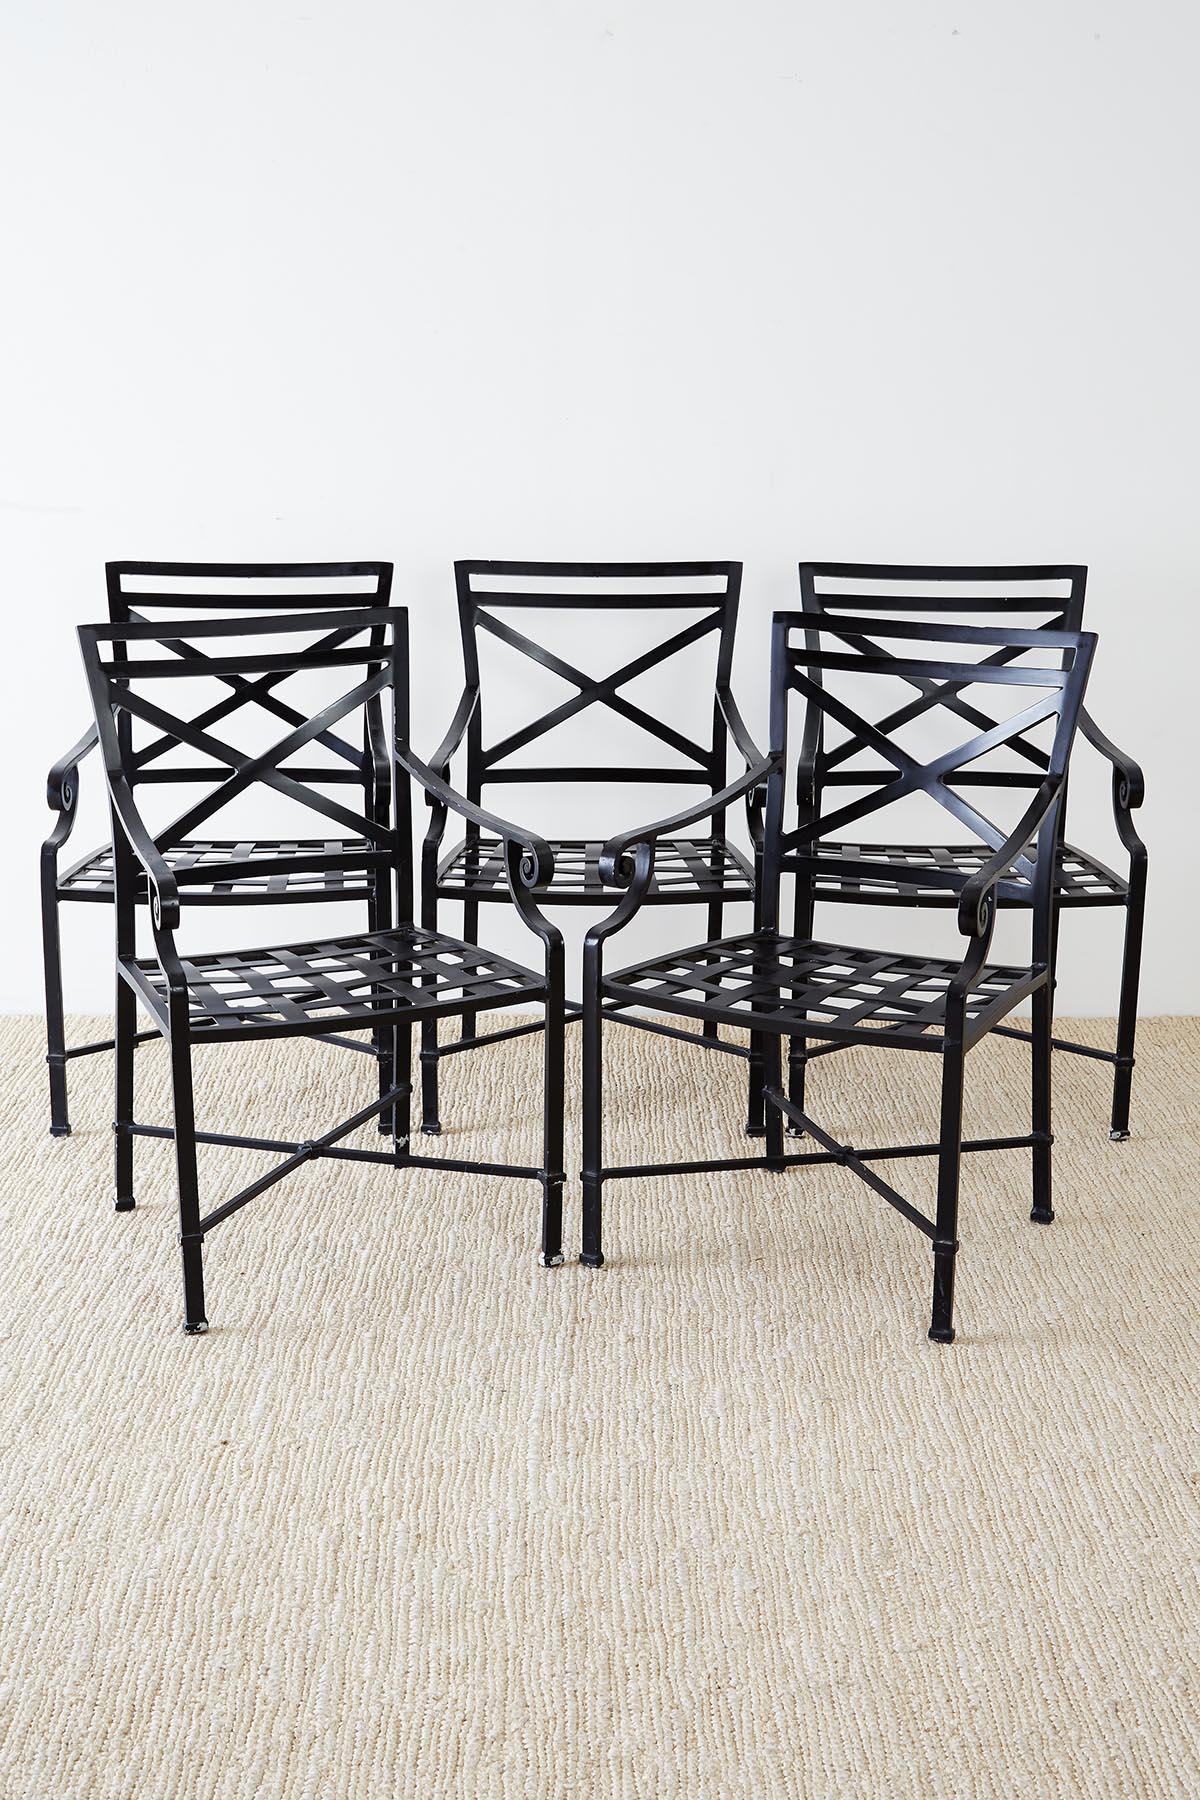 Set of 10 Neoclassical Style Aluminum Patio Garden Chairs In Good Condition In Rio Vista, CA